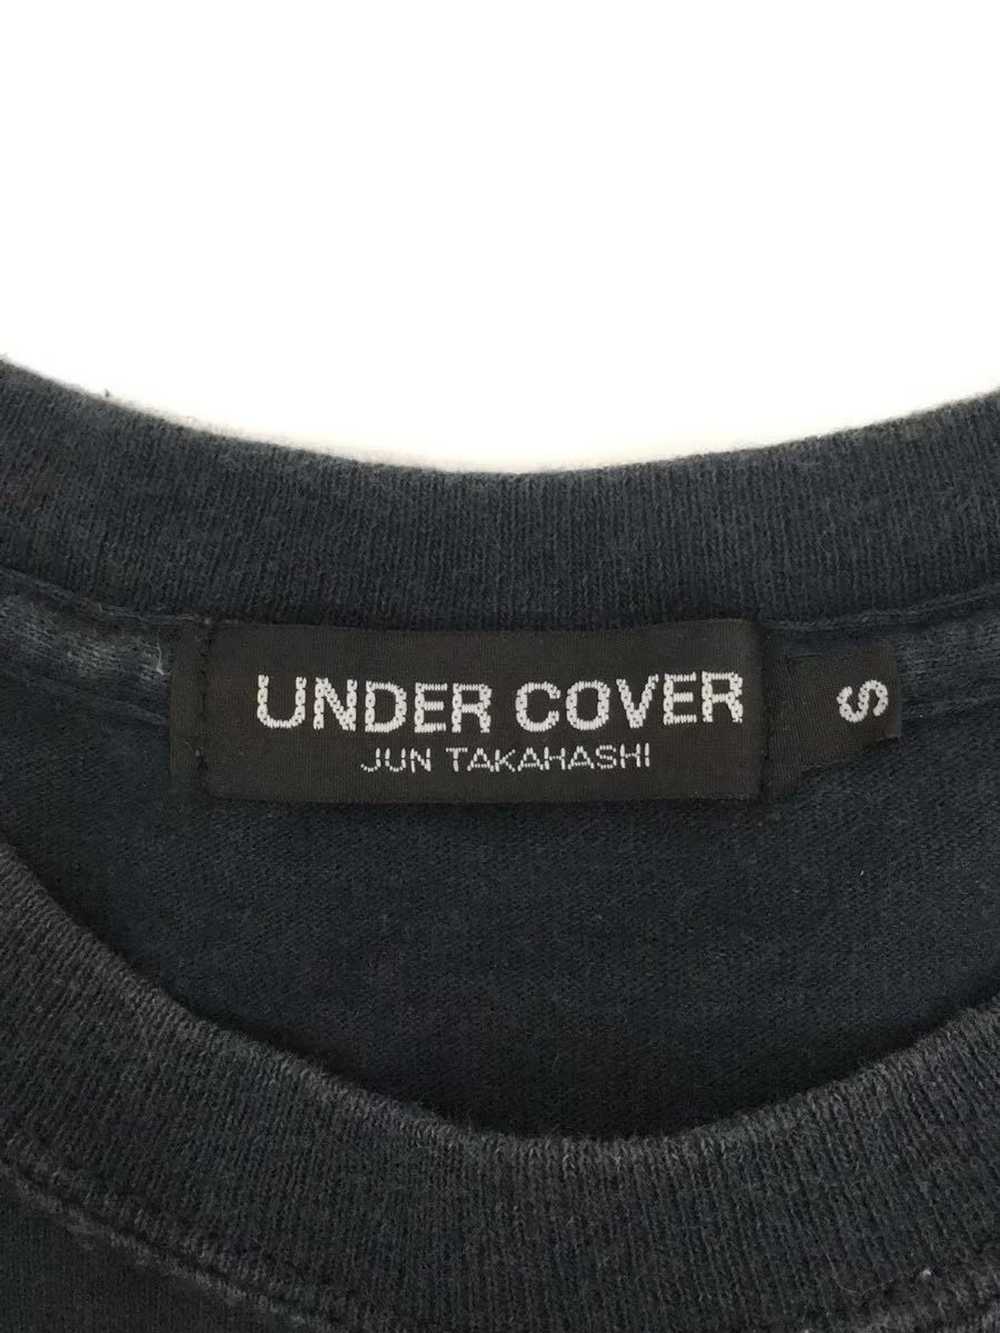 Undercover "We Make Noise Not Clothes" Tee - image 3